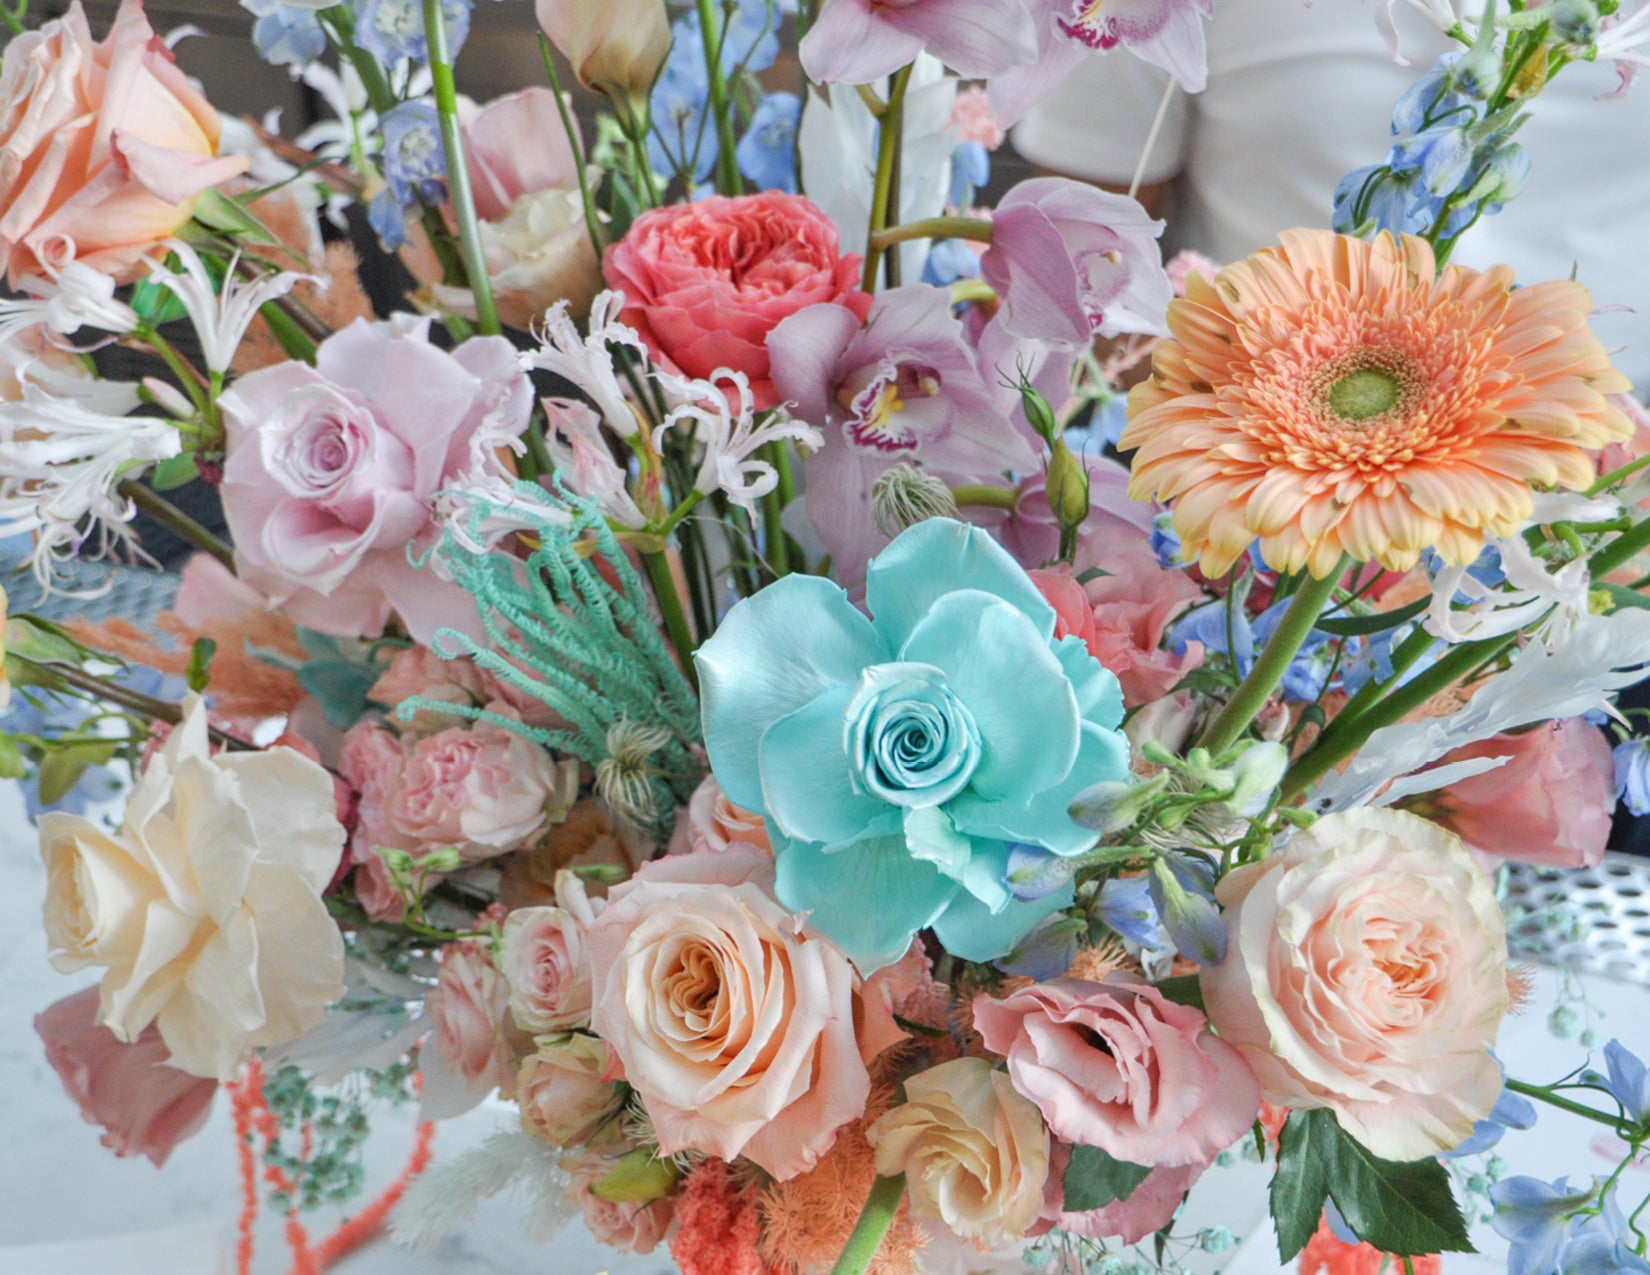 WildFlora TruSkin Kylie Cantrall Event collaboration iridescent iridescence color pastel rainbow palette anthurium ranunculus rose dahlia daisy delphinium lily orchid magical shimmer